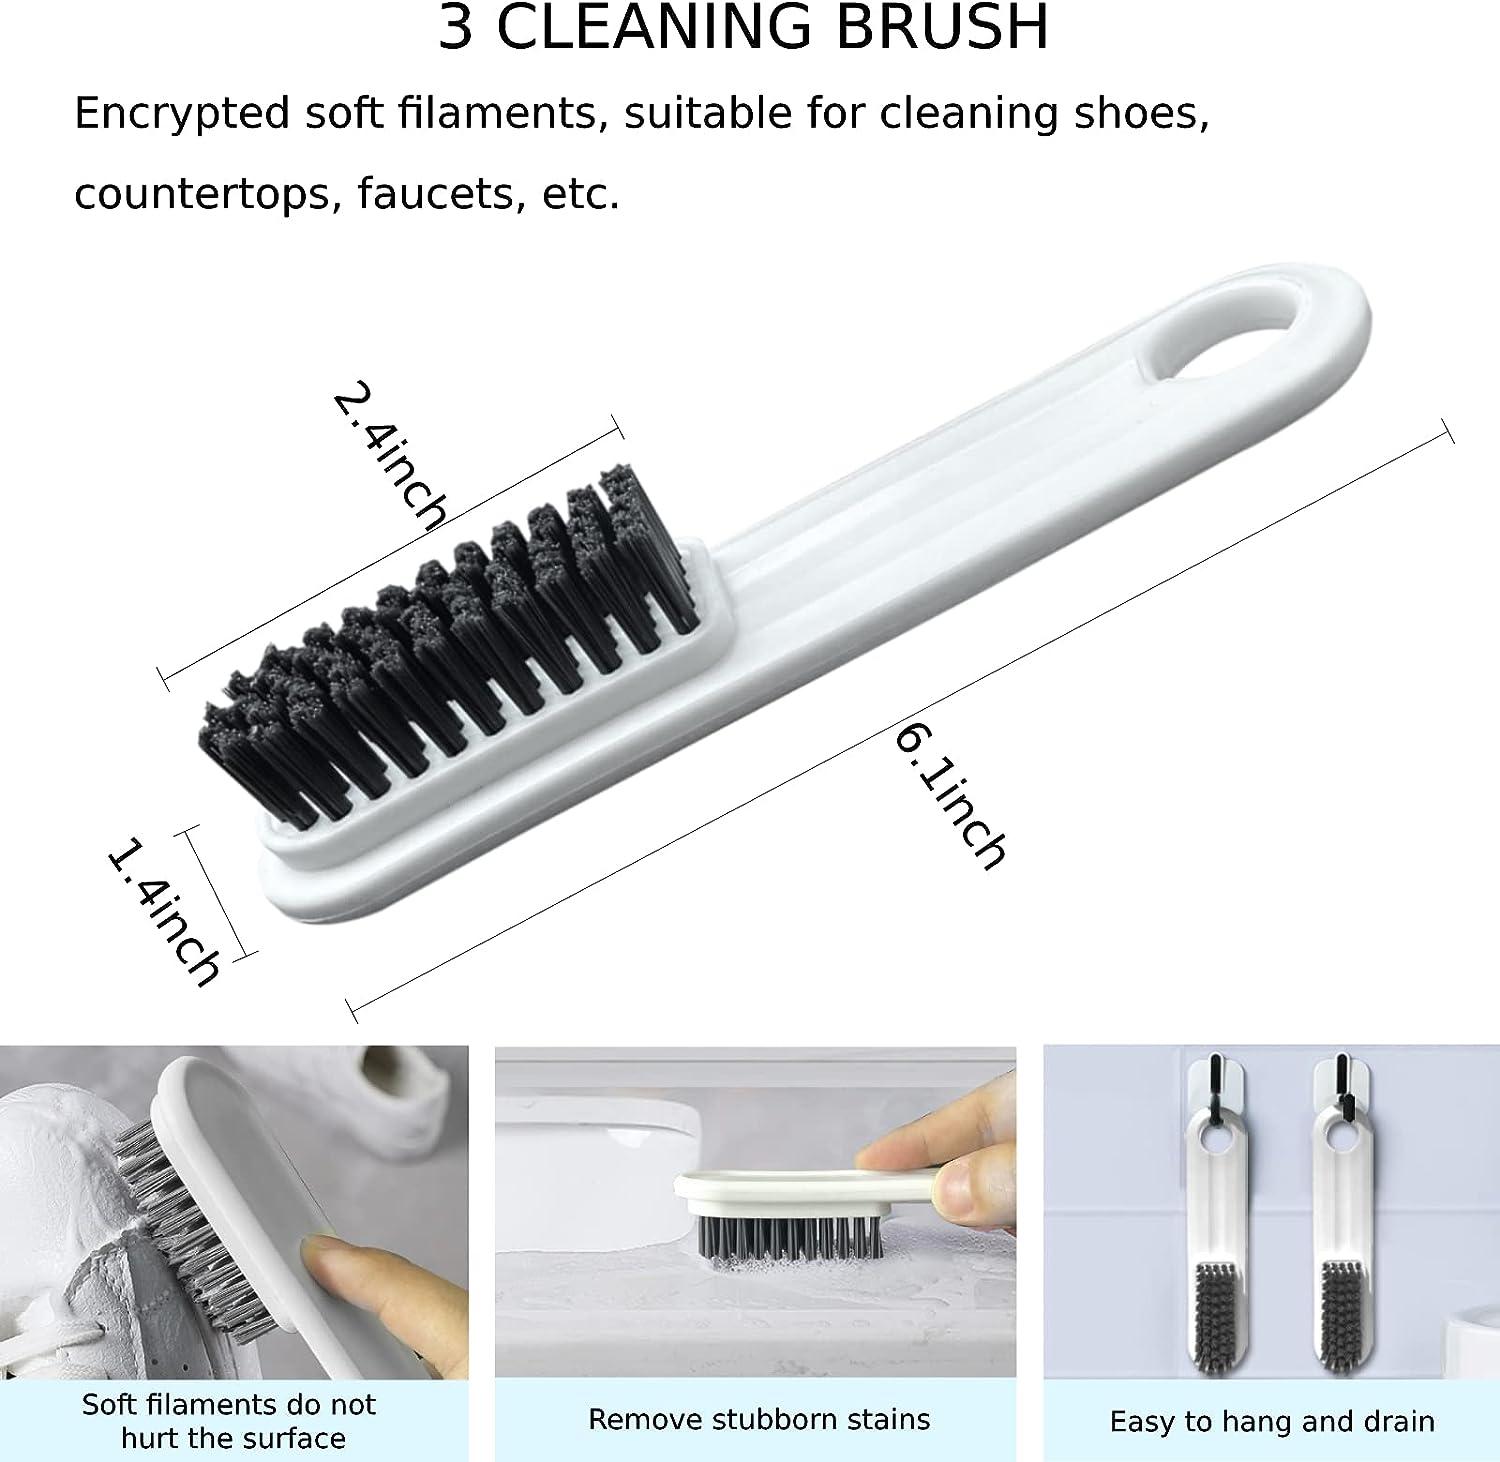 Silicon Toilet Brush - 3 In 1 Cleaner Brush For Bathroom